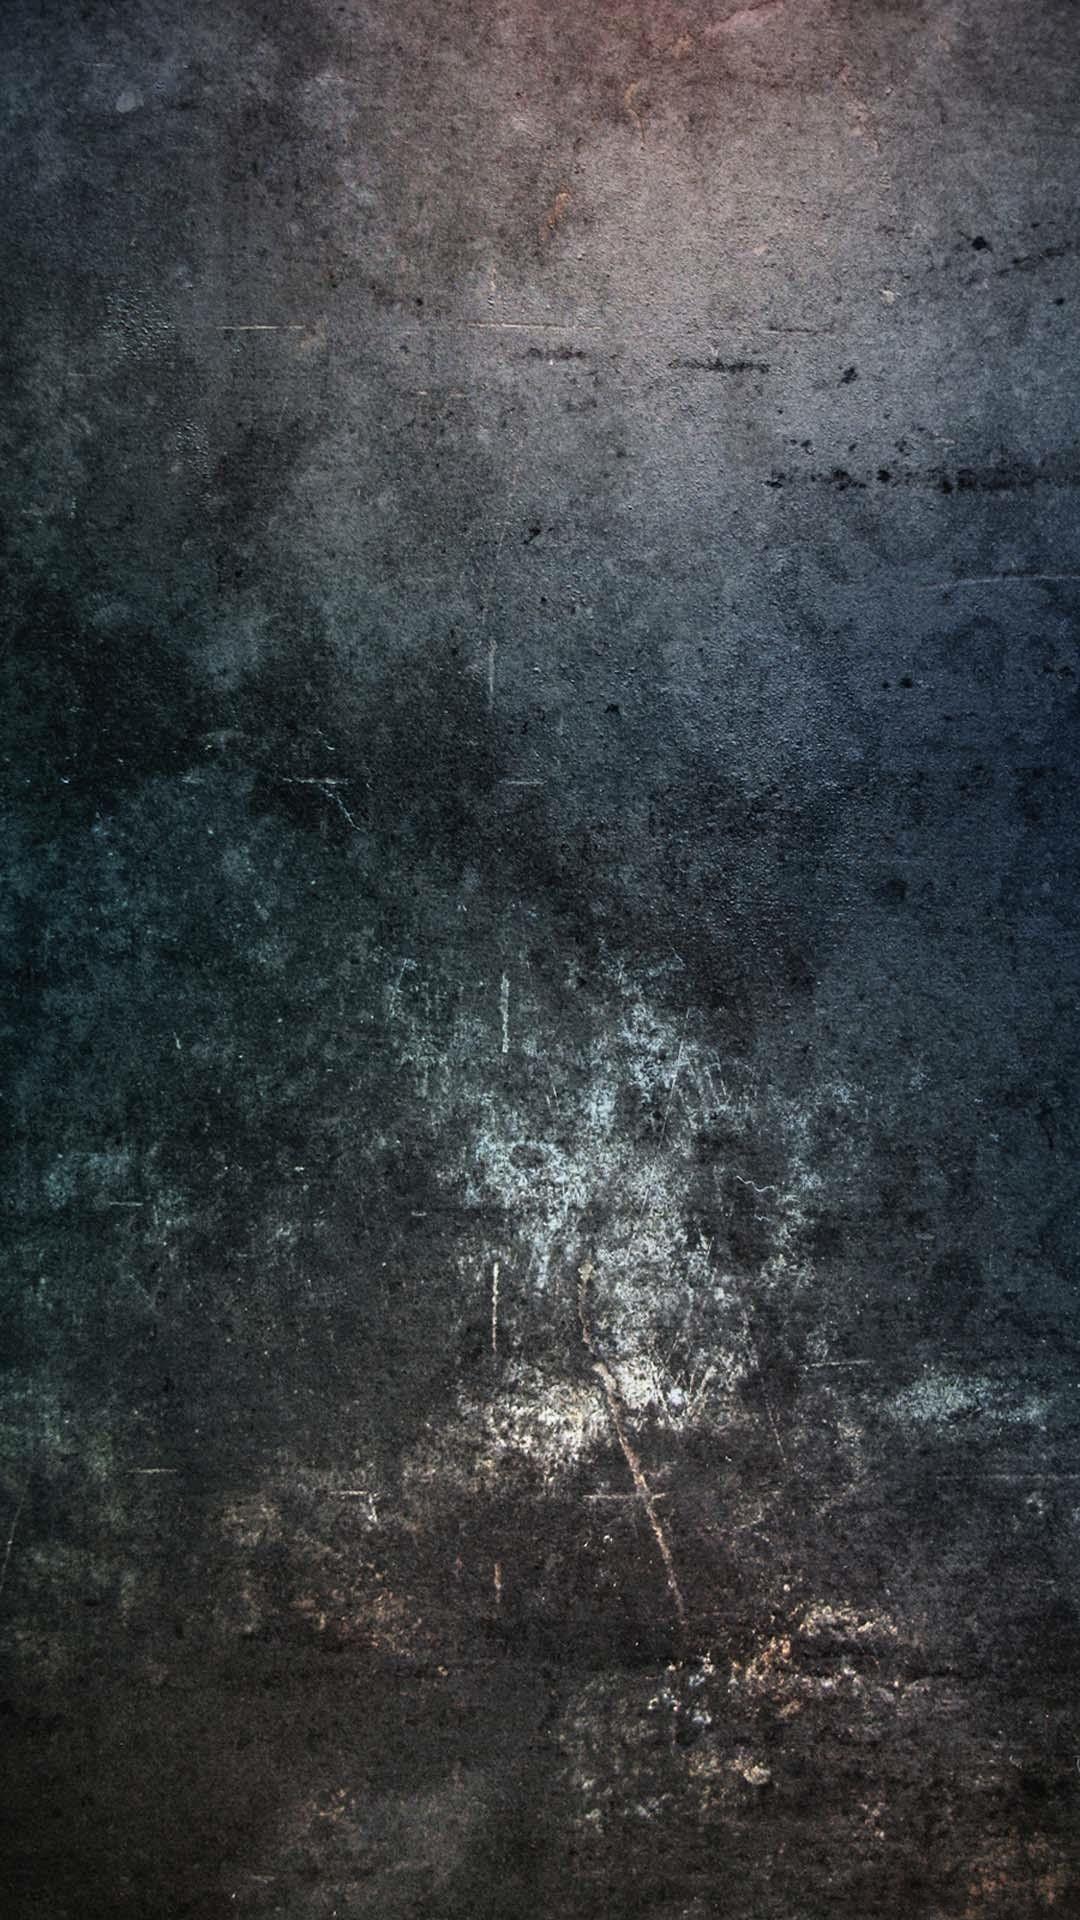 Dark Rocks Texture iPhone Wallpaper. Tap to see more iPhone